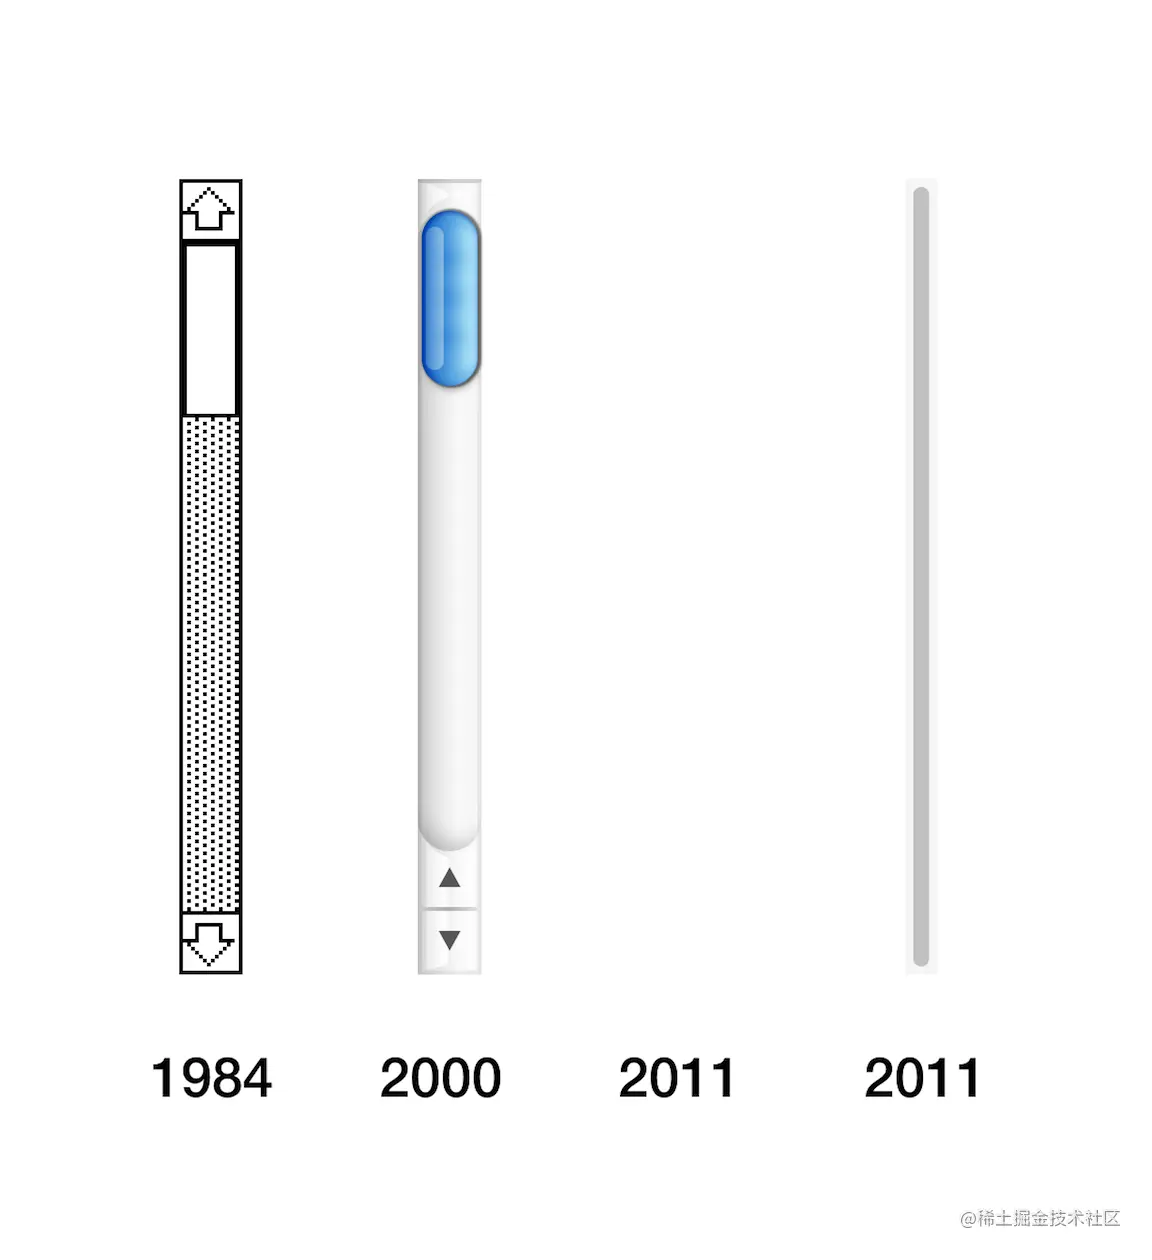 Design of Mac scrollbars over time